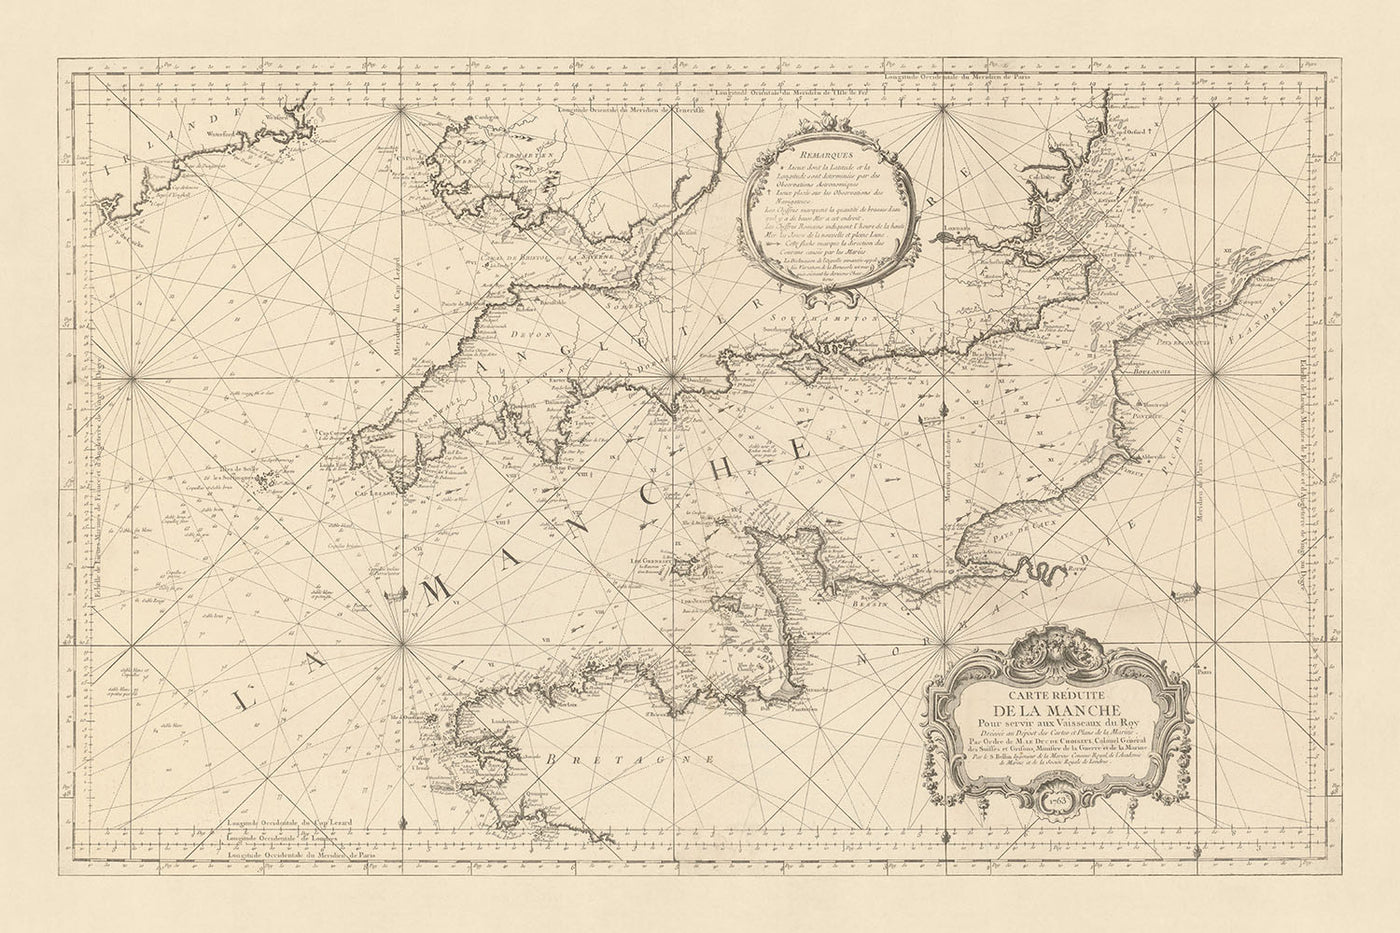 Old Naval Map of La Manche (English Channel) by Bellin, 1763: South Coast of England, Northern France, Isle of Wight, Channel Isles